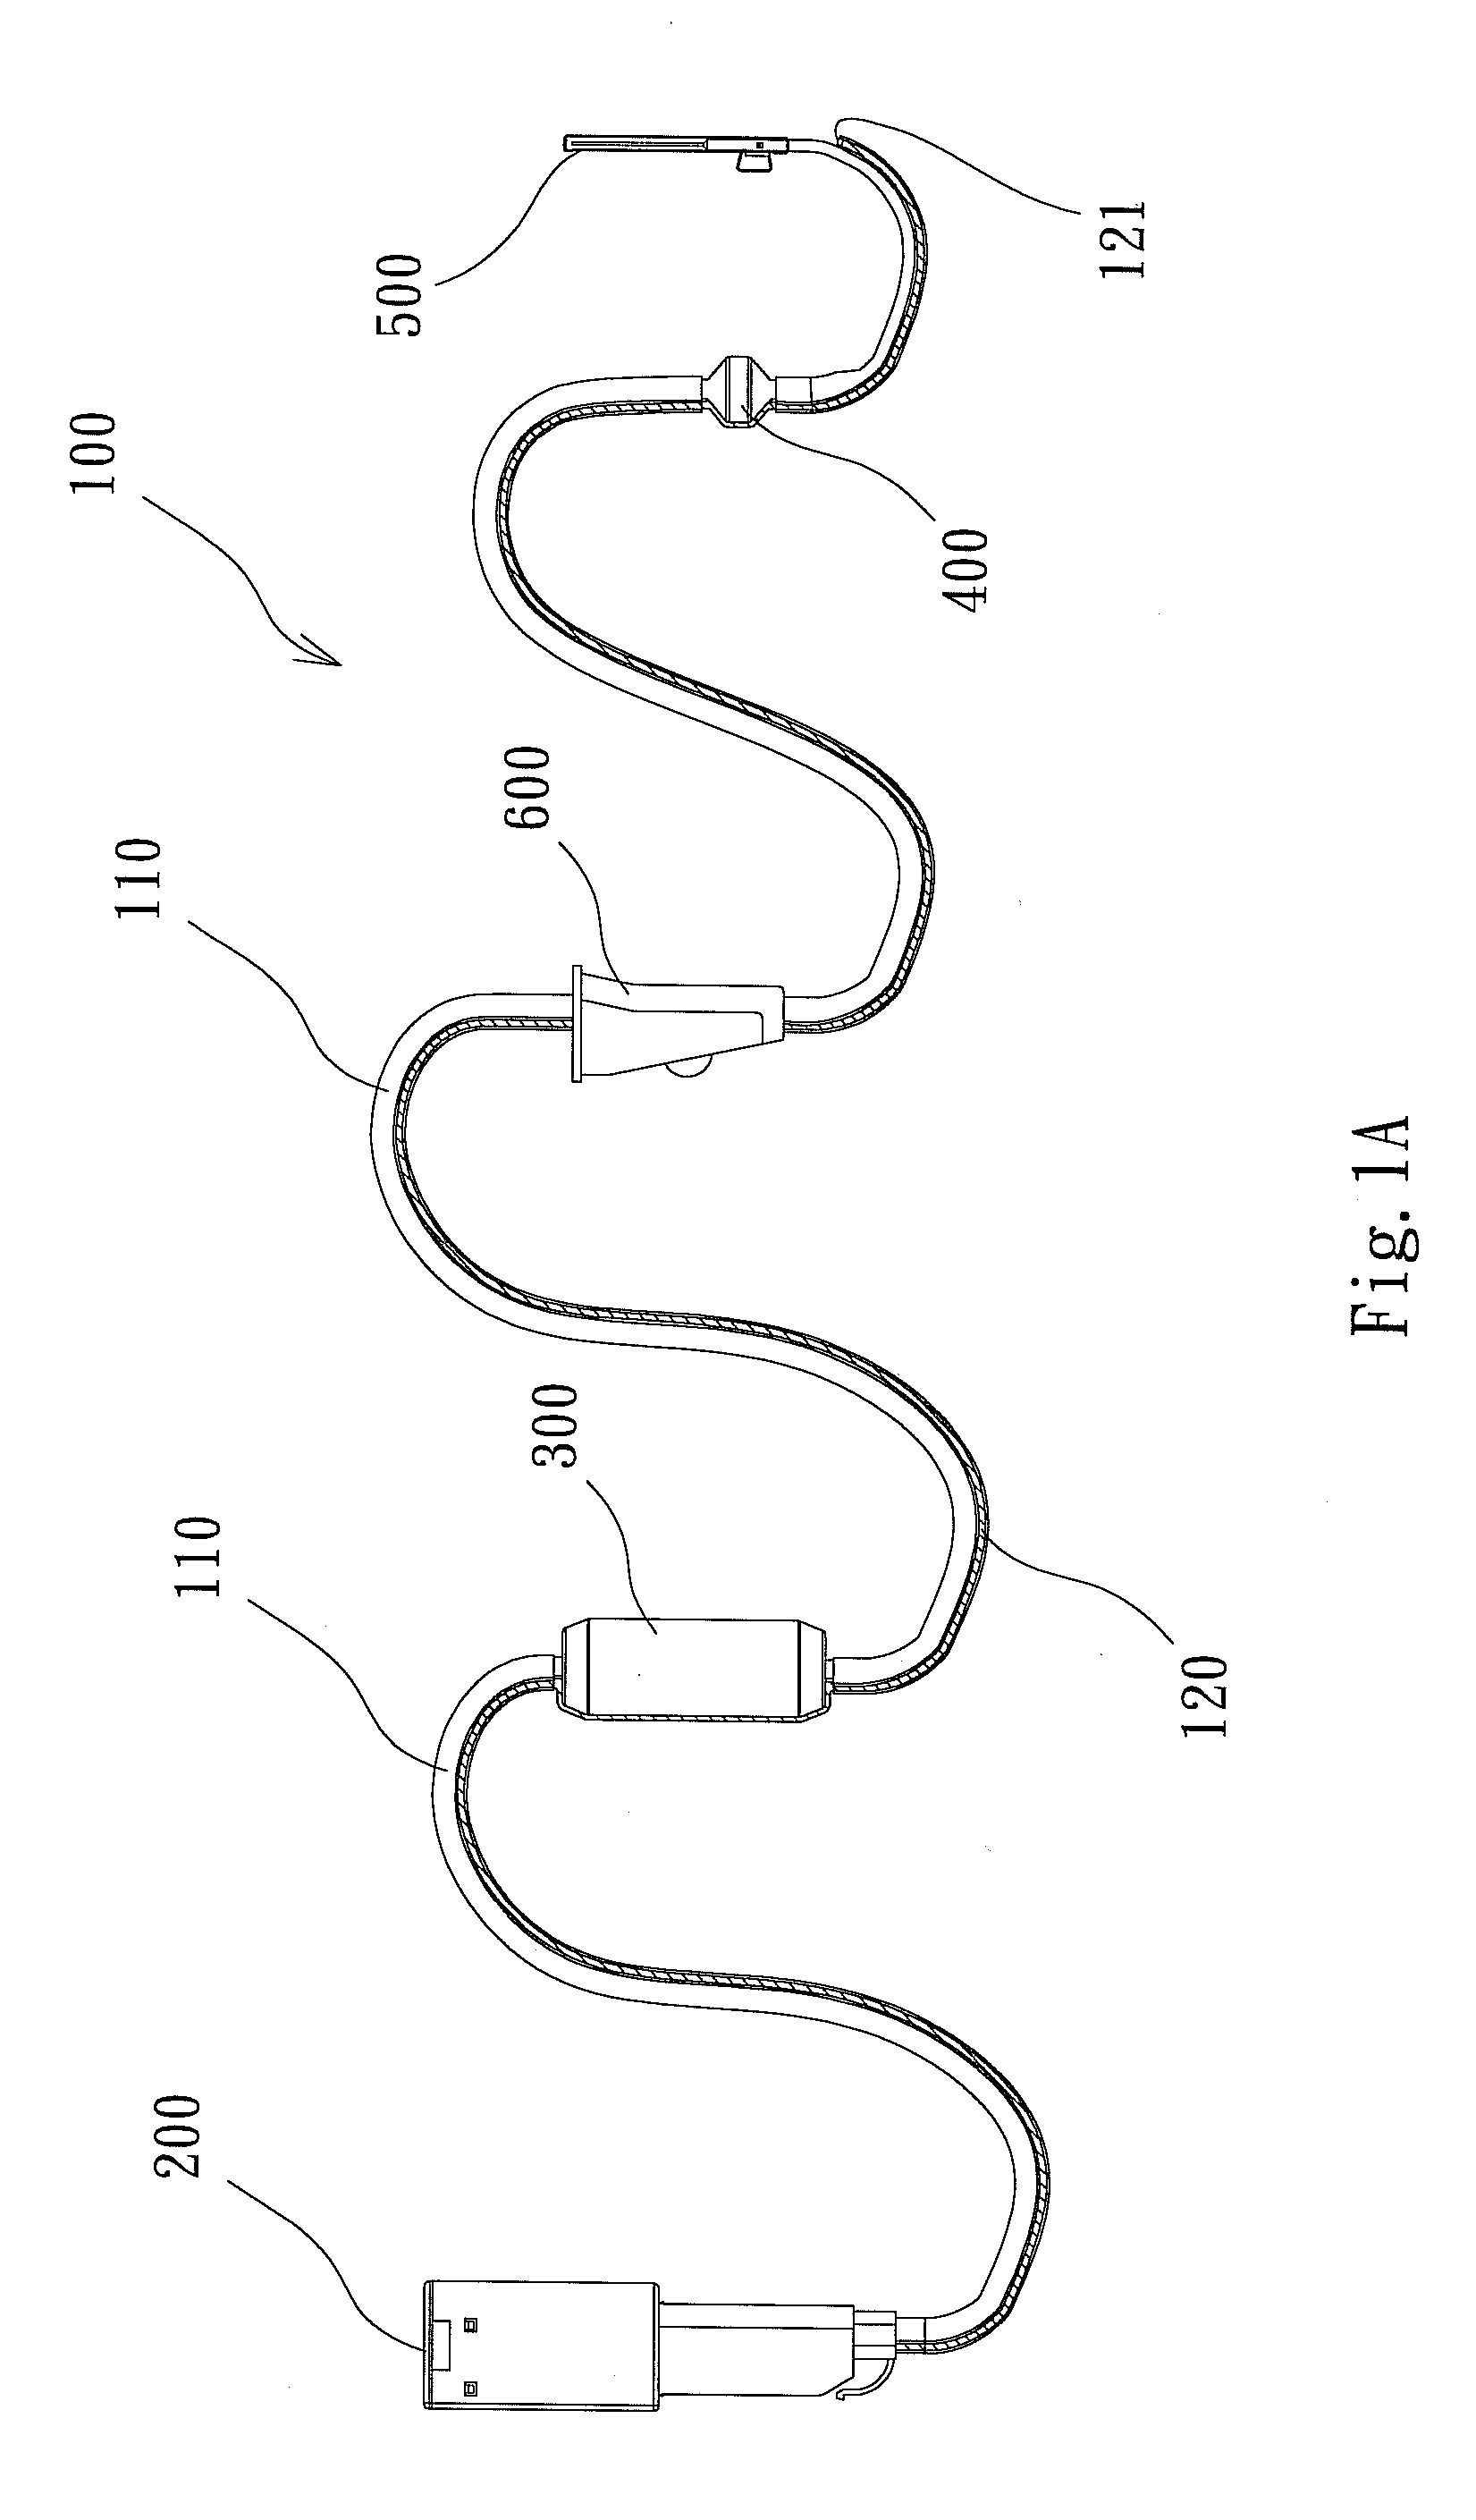 Single use intravenous therapy administering device with  needle safety covers